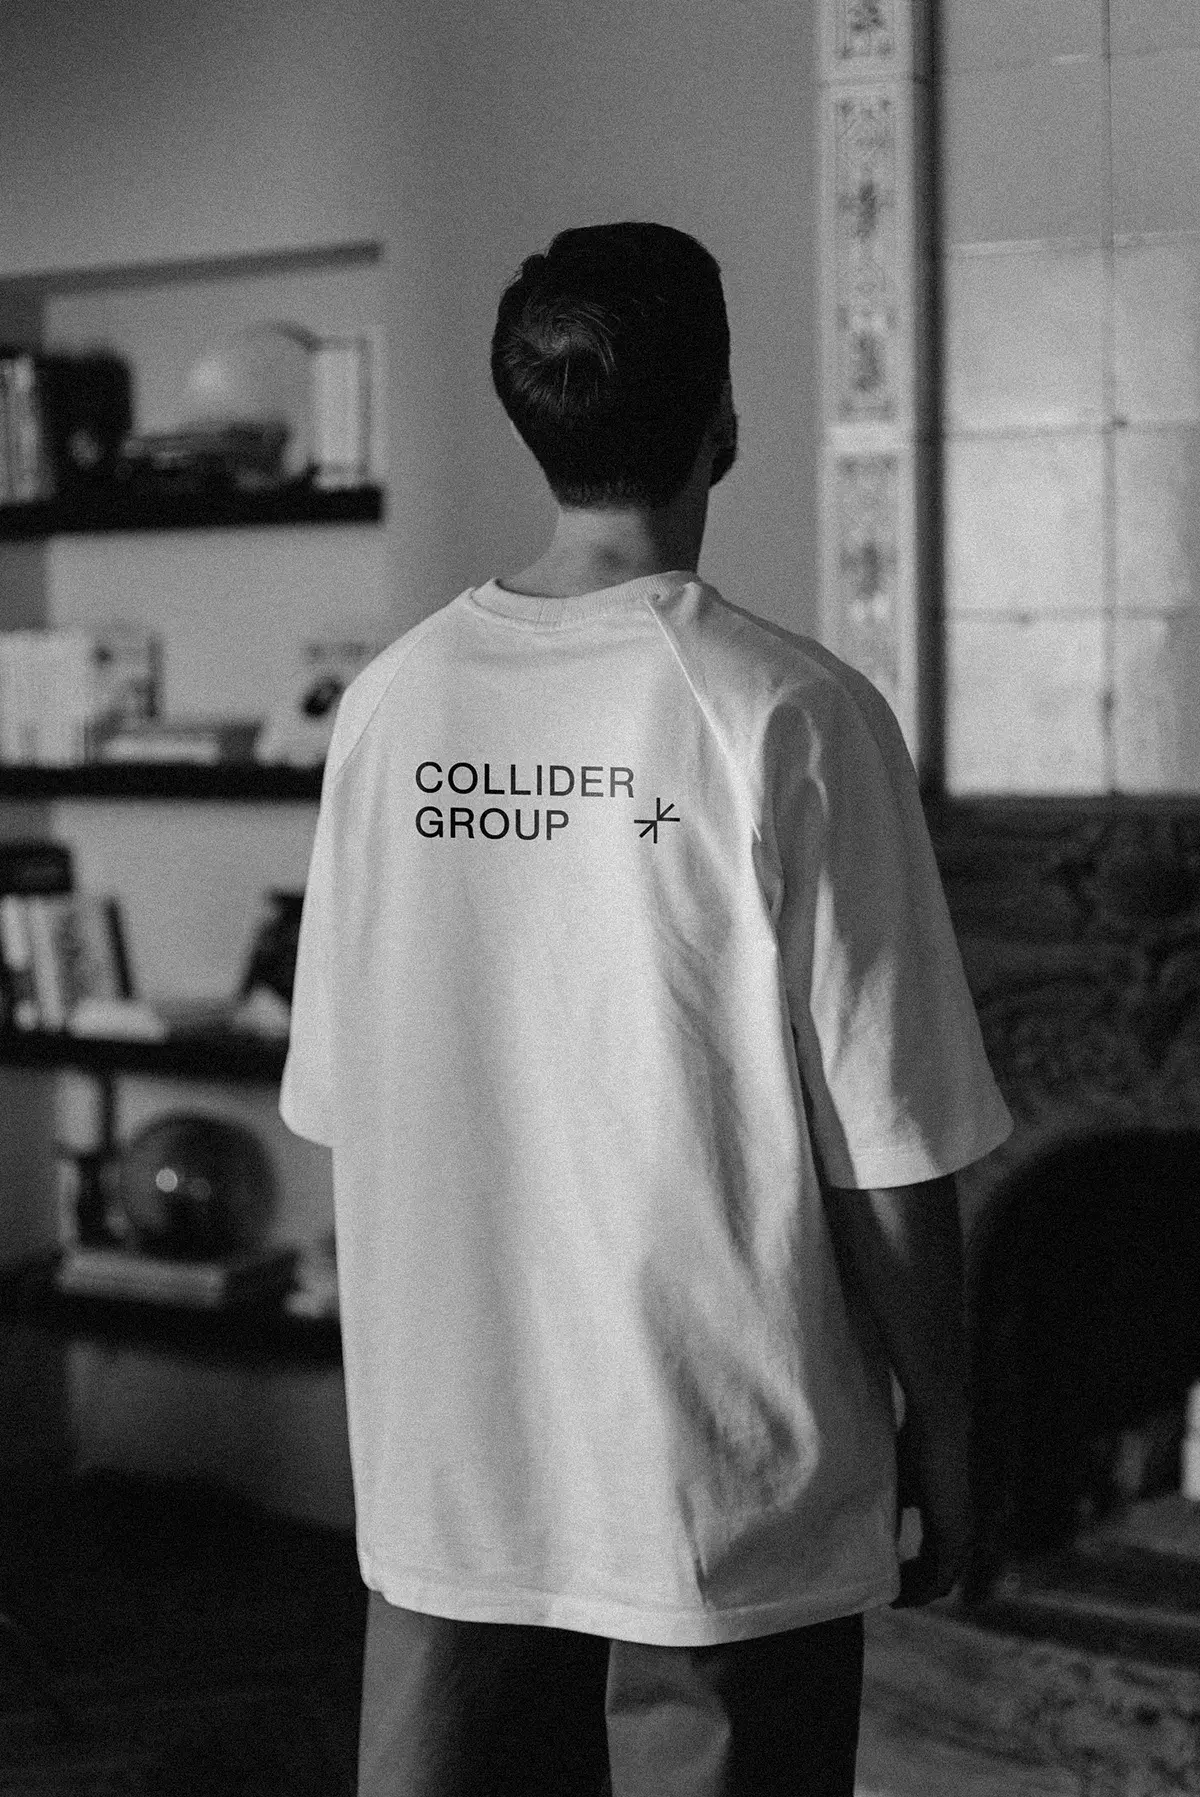 View of a man from behind who is wearing a white shirt with a black Collider Group logo on the back